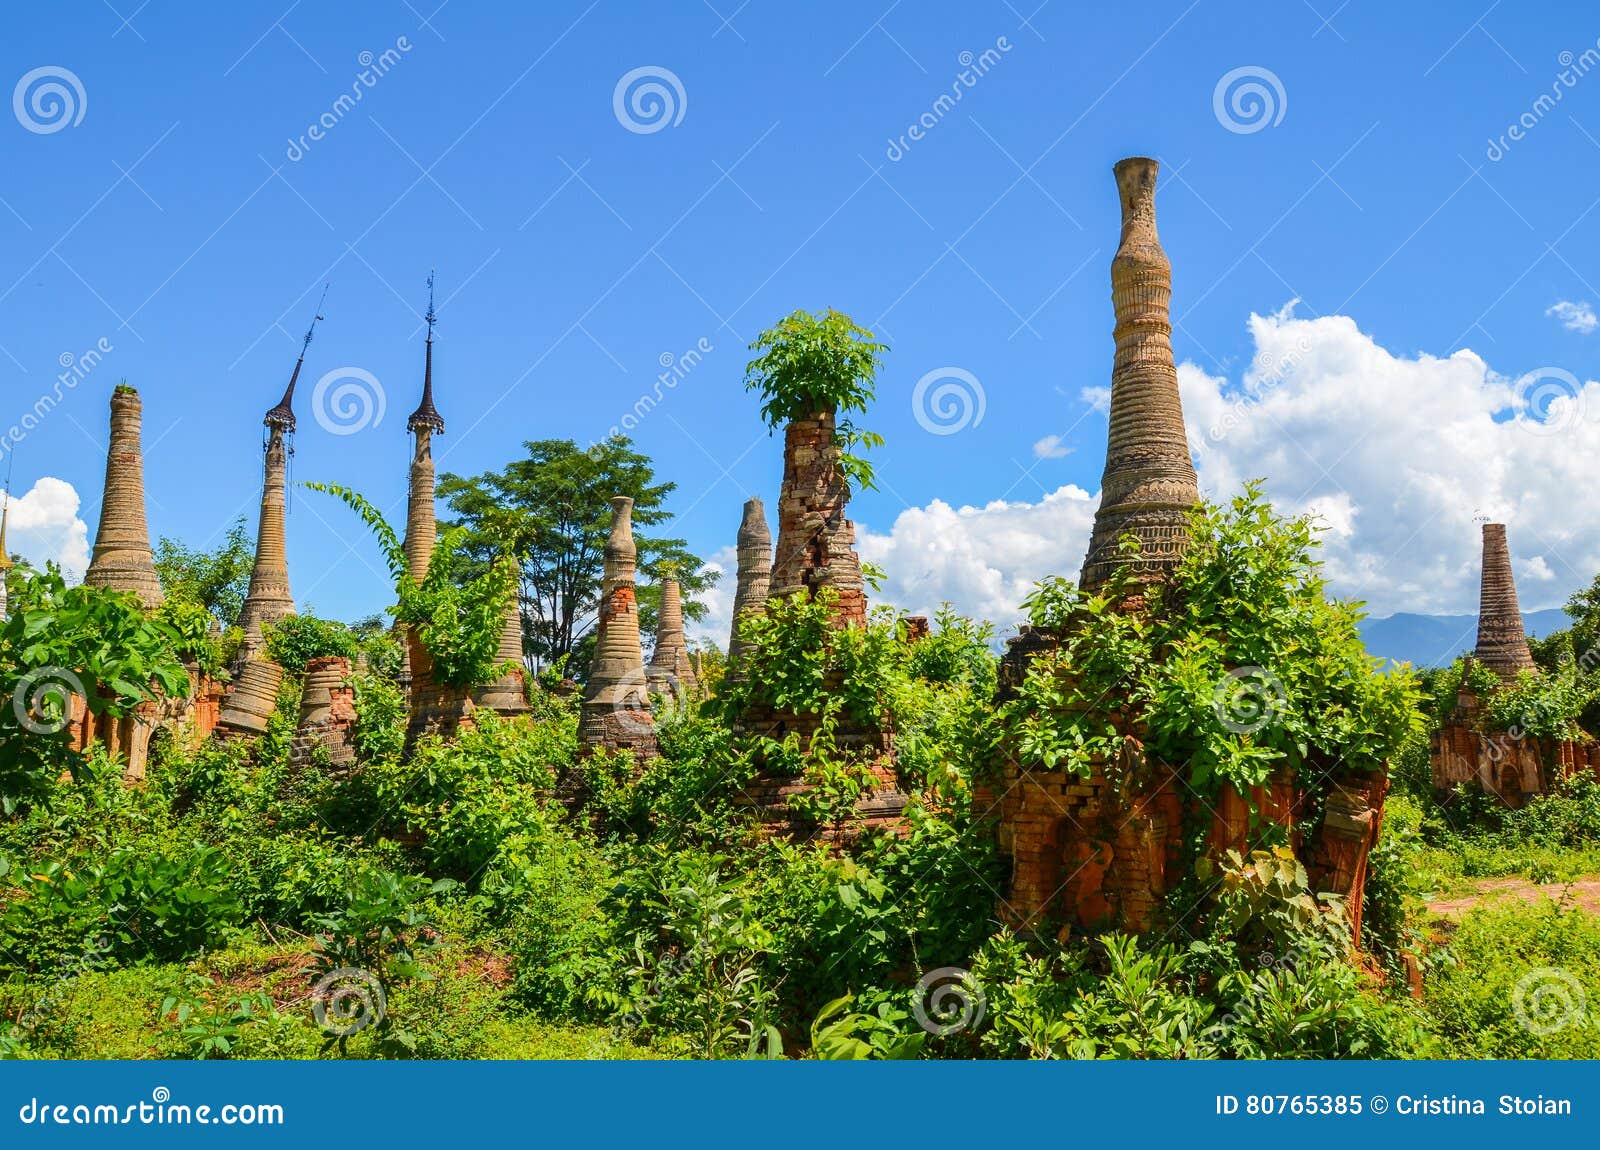 Shwe Indein Pagoda in Inle Lake, Shan State, Myanmar. The Indein pagoda complex is situated in the Western part of Inle Lake. There are about 1000 stupas in the area